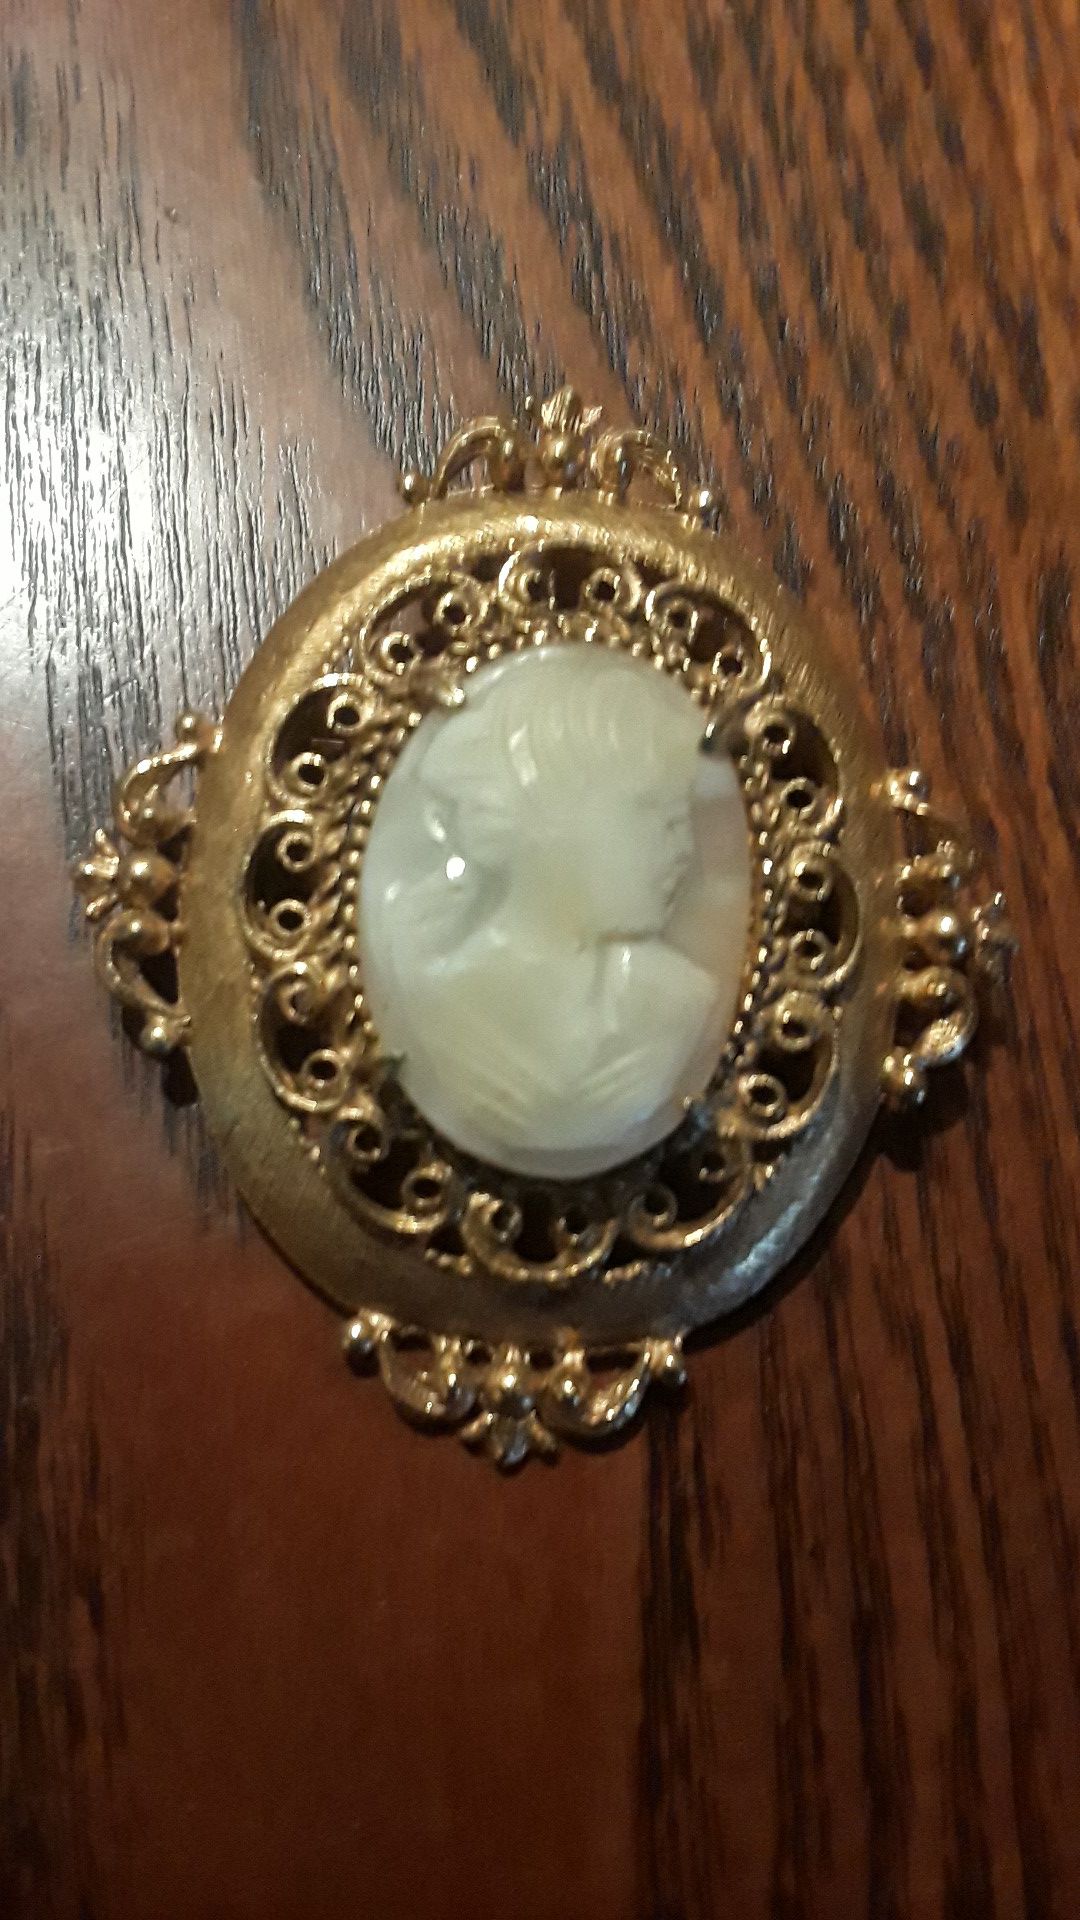 Absolutely Gorgeous old vintage Cameo brooch. BEST OFFER!!!